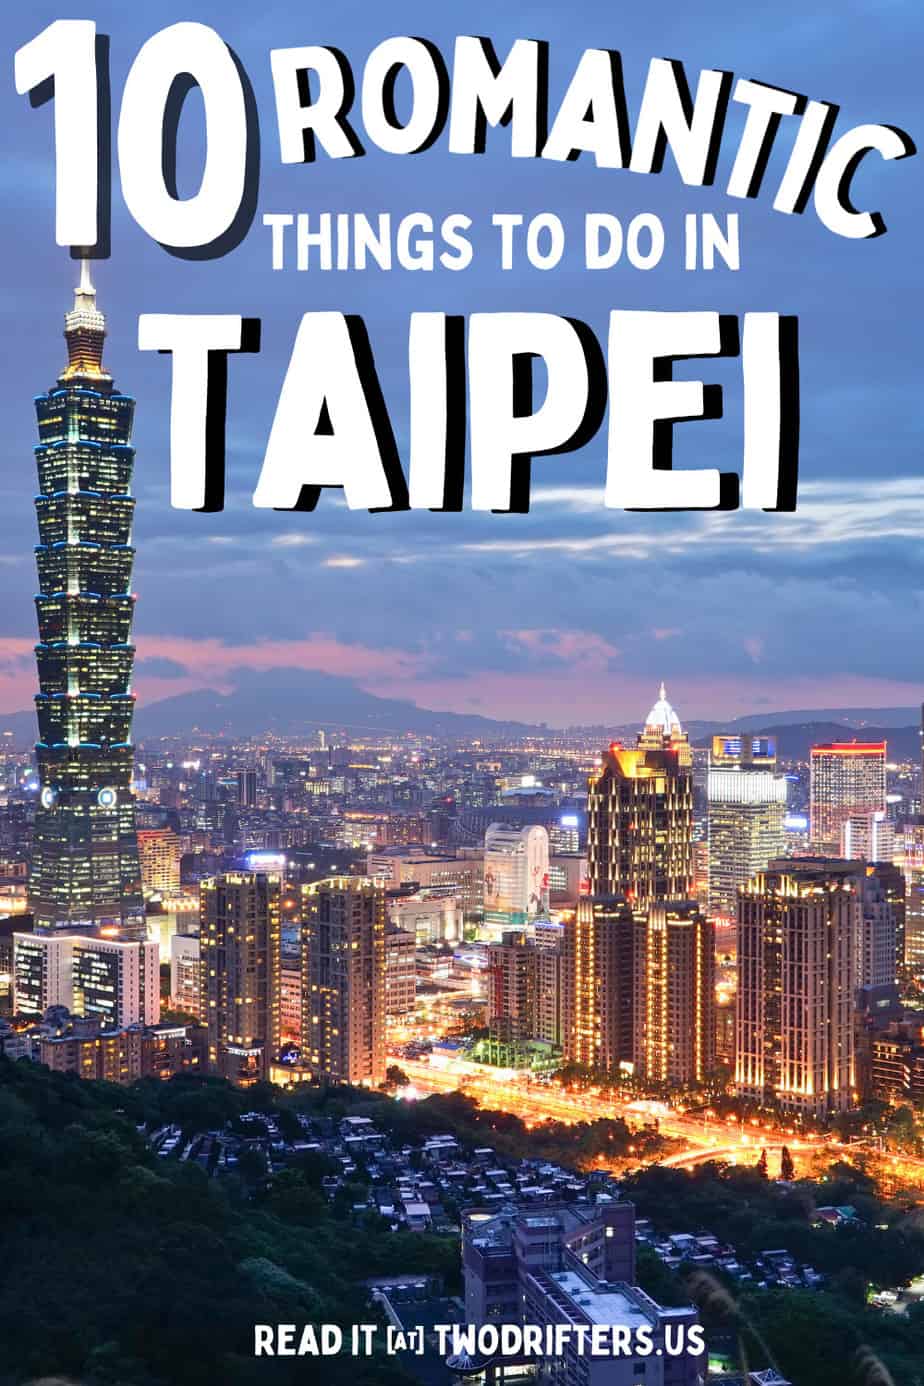 Pinterest social share image that says "10 Romantic Things to do in Taipei."